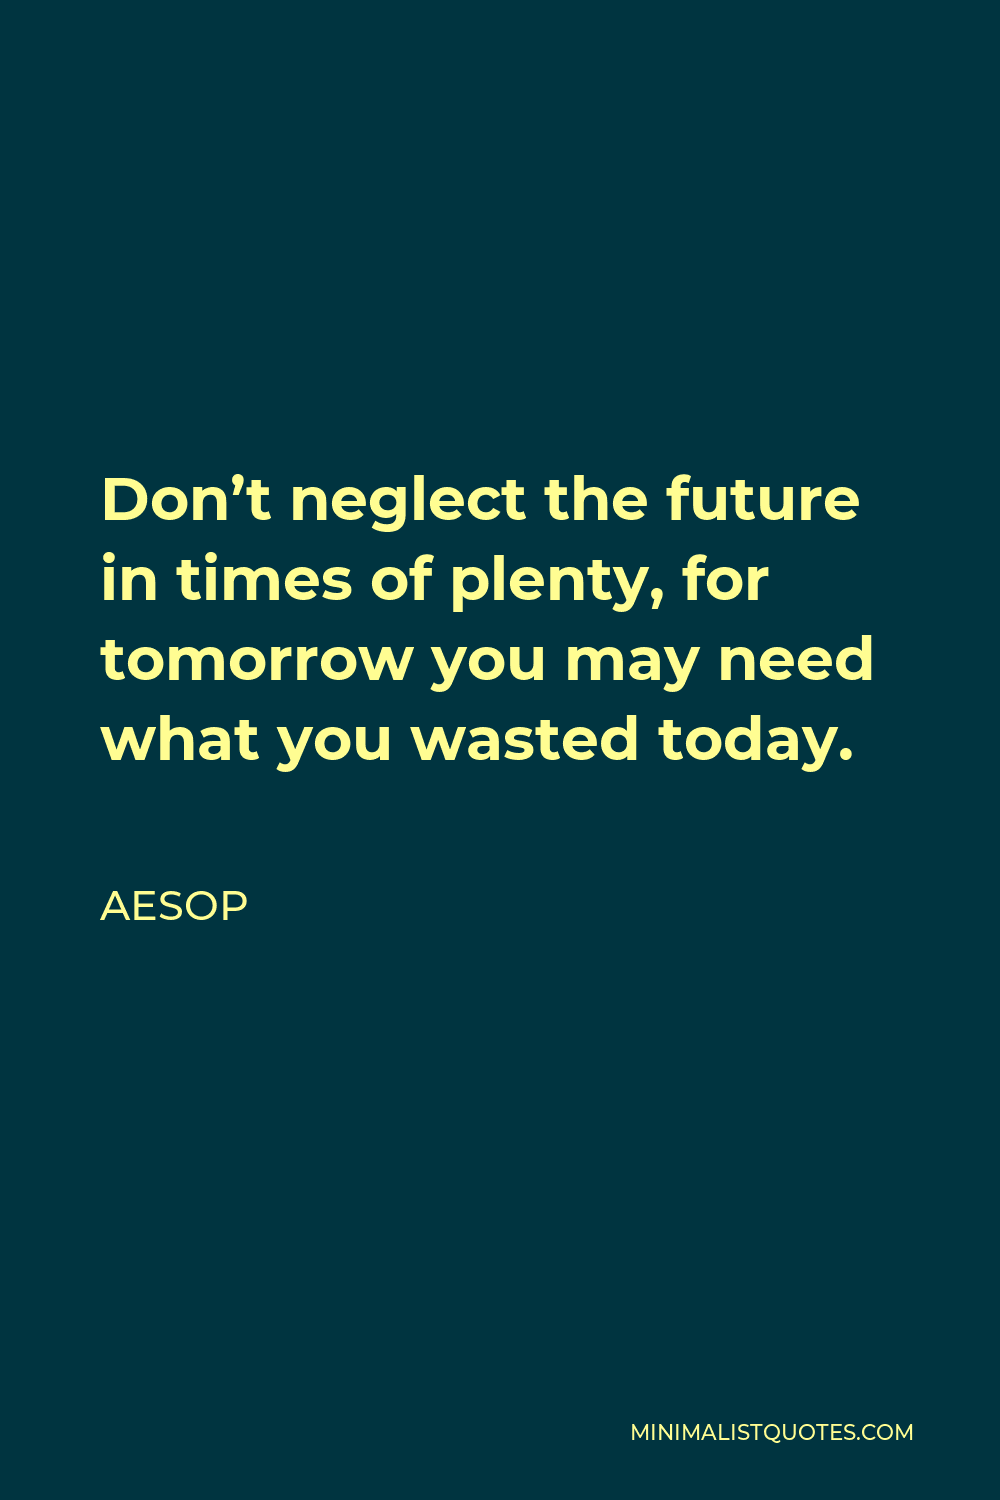 Aesop Quote - Don’t neglect the future in times of plenty, for tomorrow you may need what you wasted today.